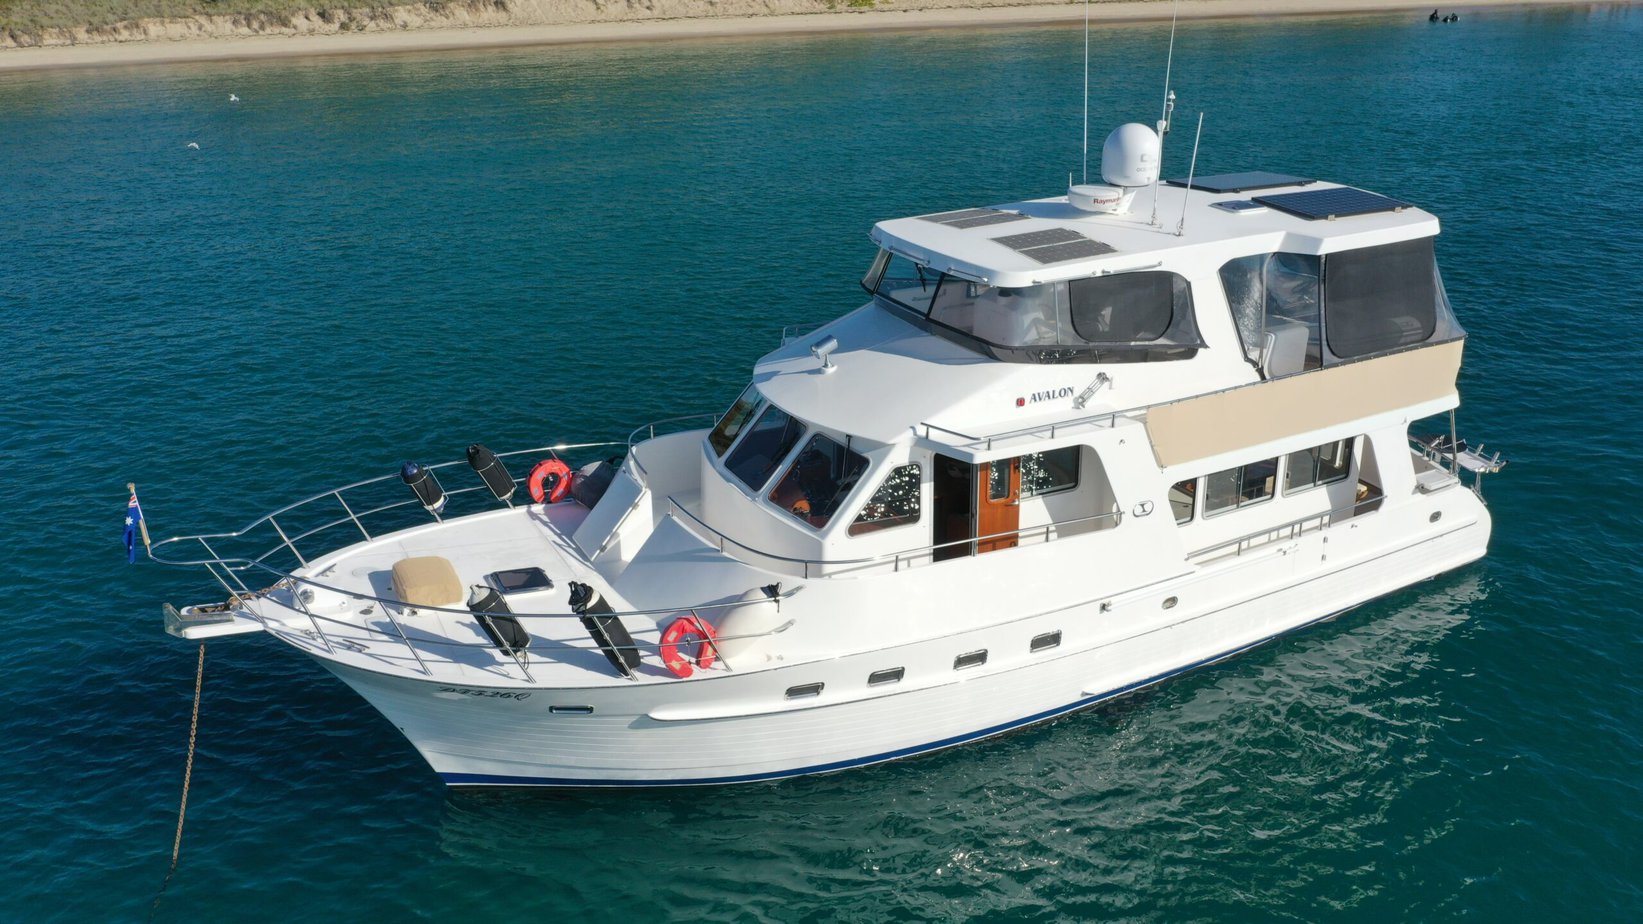 Integrity motor yacht for sale